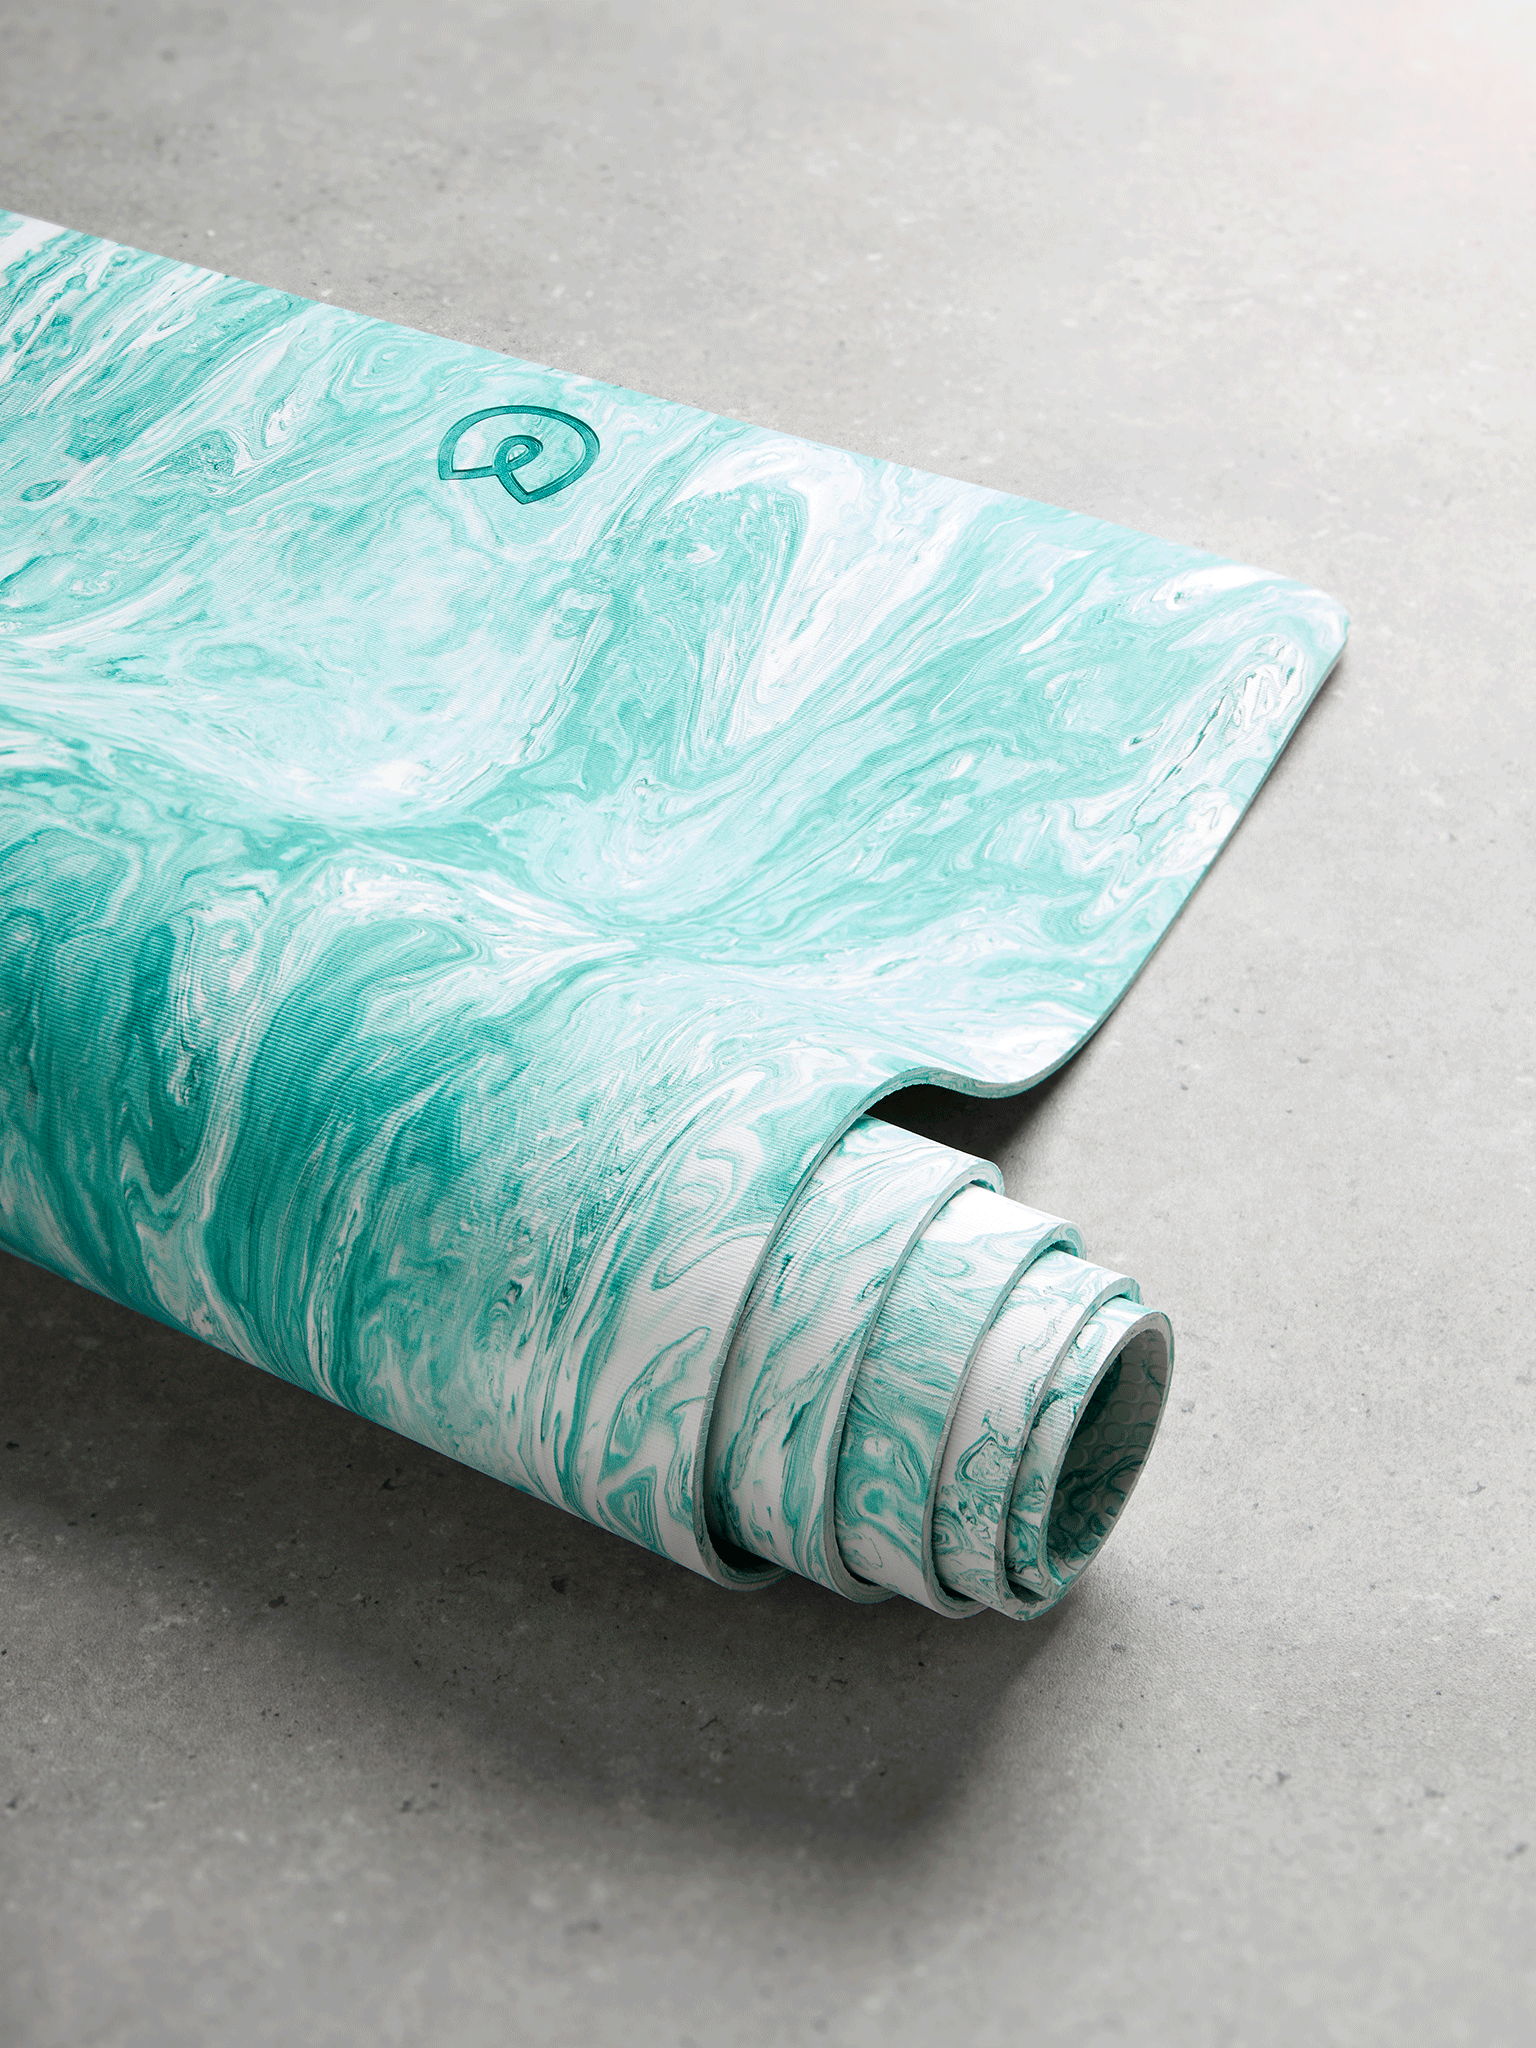 Luxury turquoise marbled yoga mat partially unrolled on grey concrete floor, side perspective, textured non-slip surface visible, exercise and wellness accessory